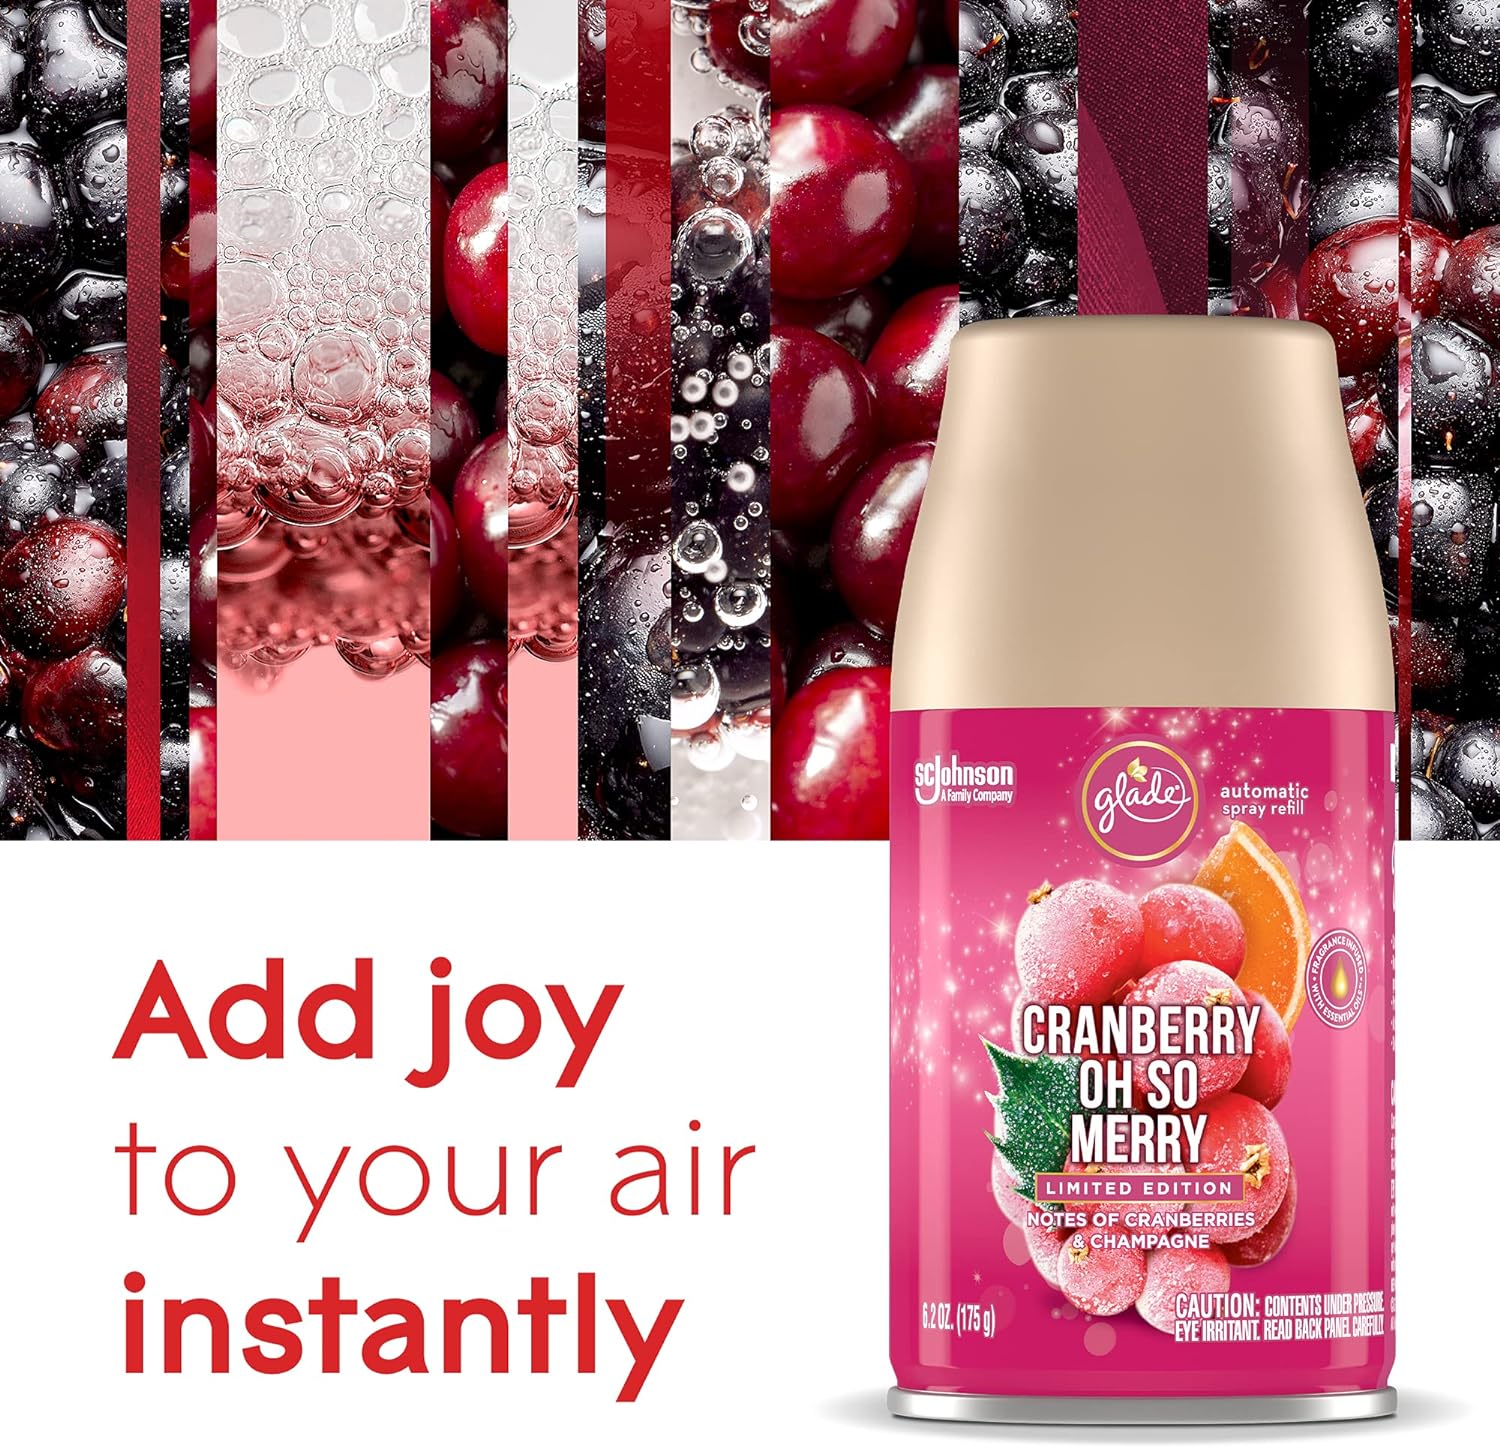 Glade Automatic Spray Refill, Air Freshener for Home and Bathroom, Cranberry Oh So Merry, 6.2 Oz : Health & Household